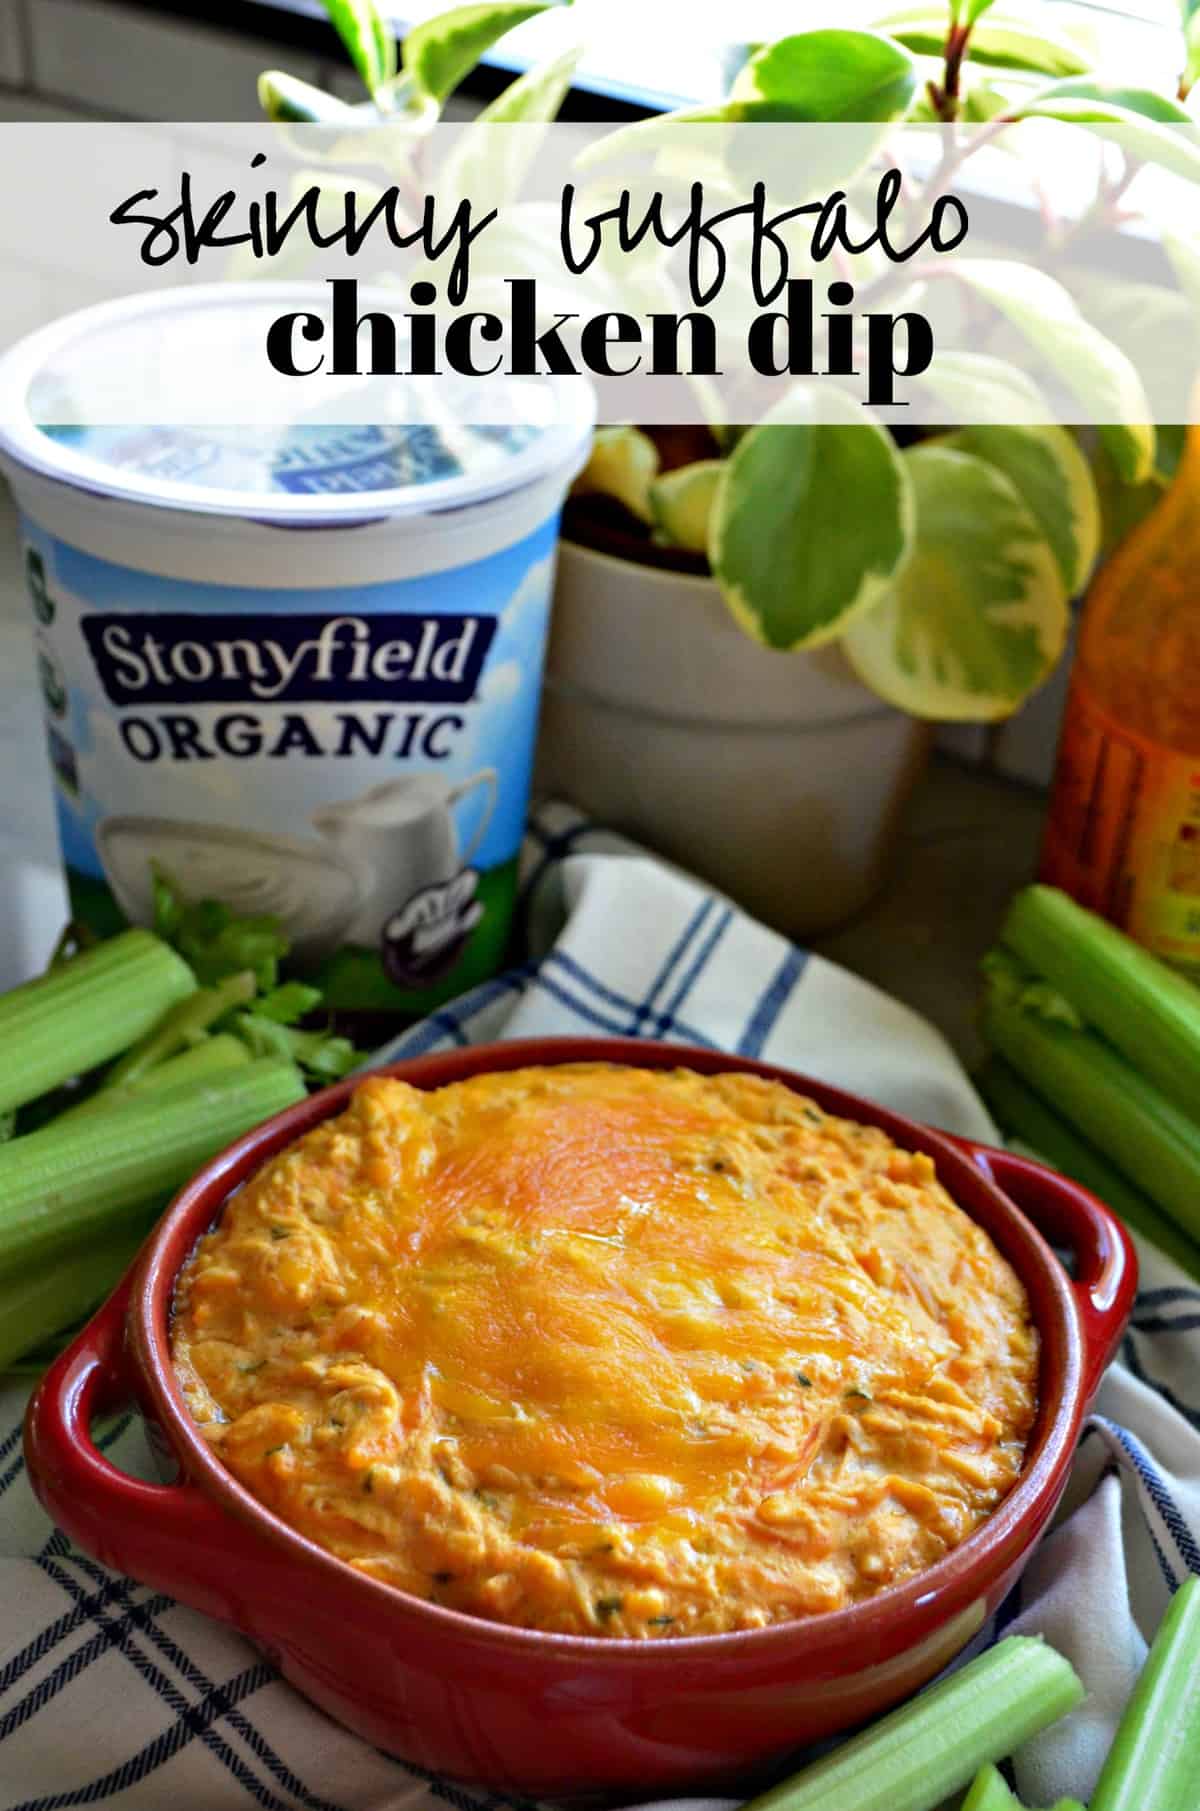 thick orange dip topped with melted cheese in small red bowl next to celery and with title text.